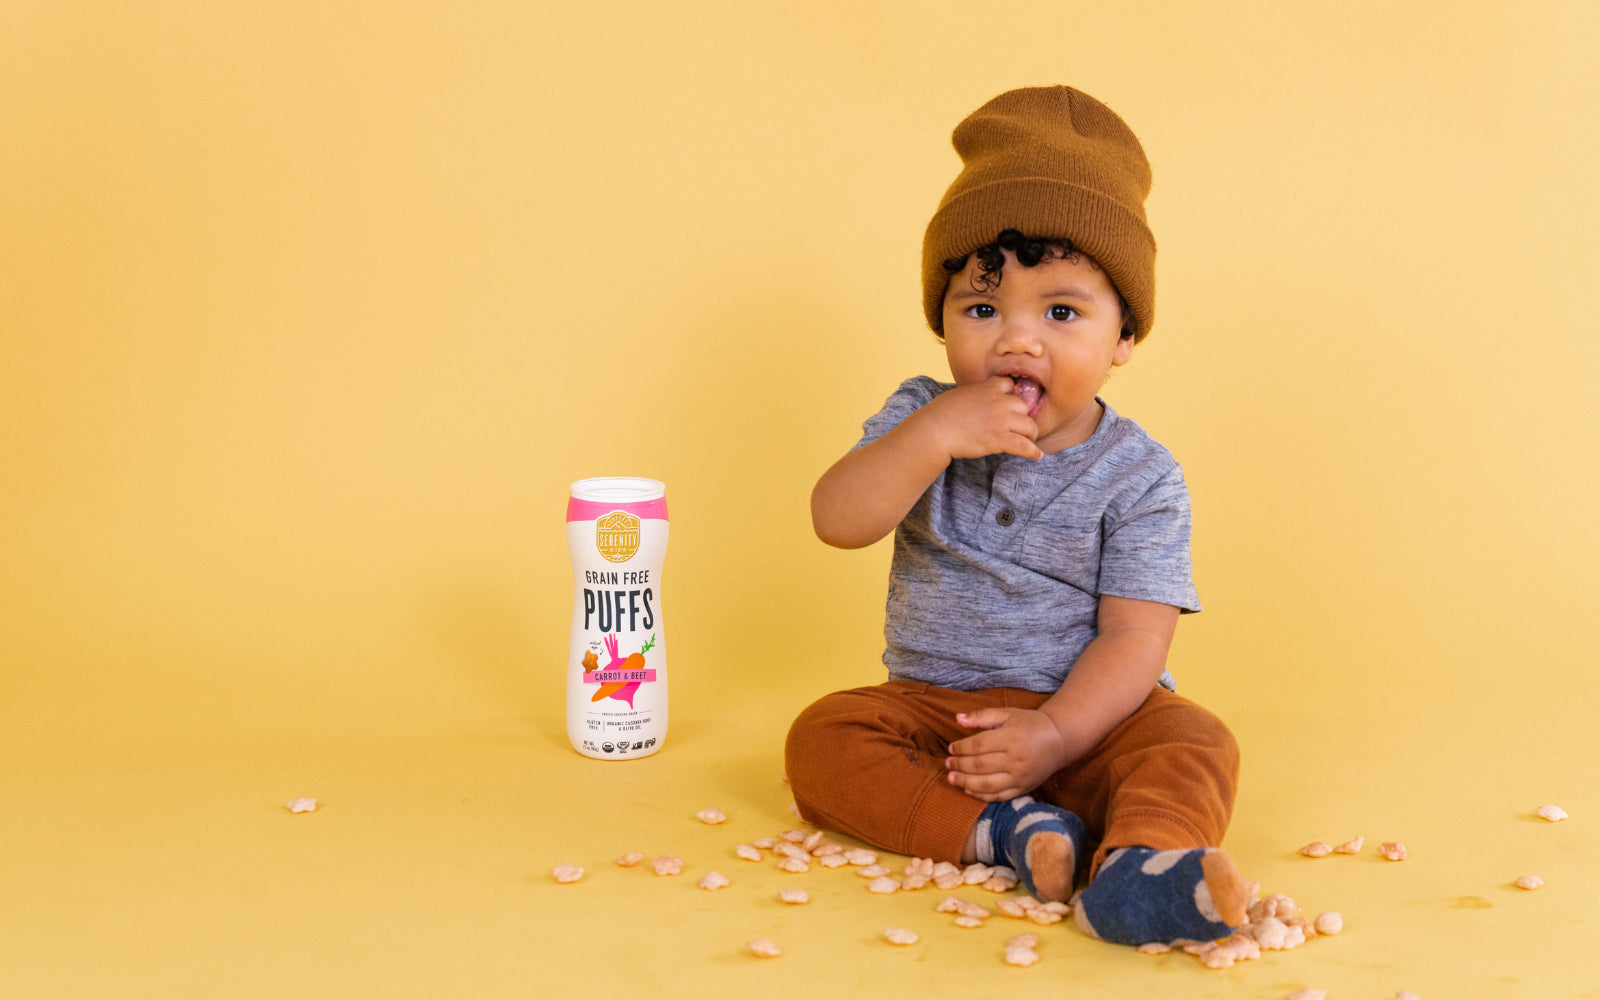 When Can Babies Have Puffs?